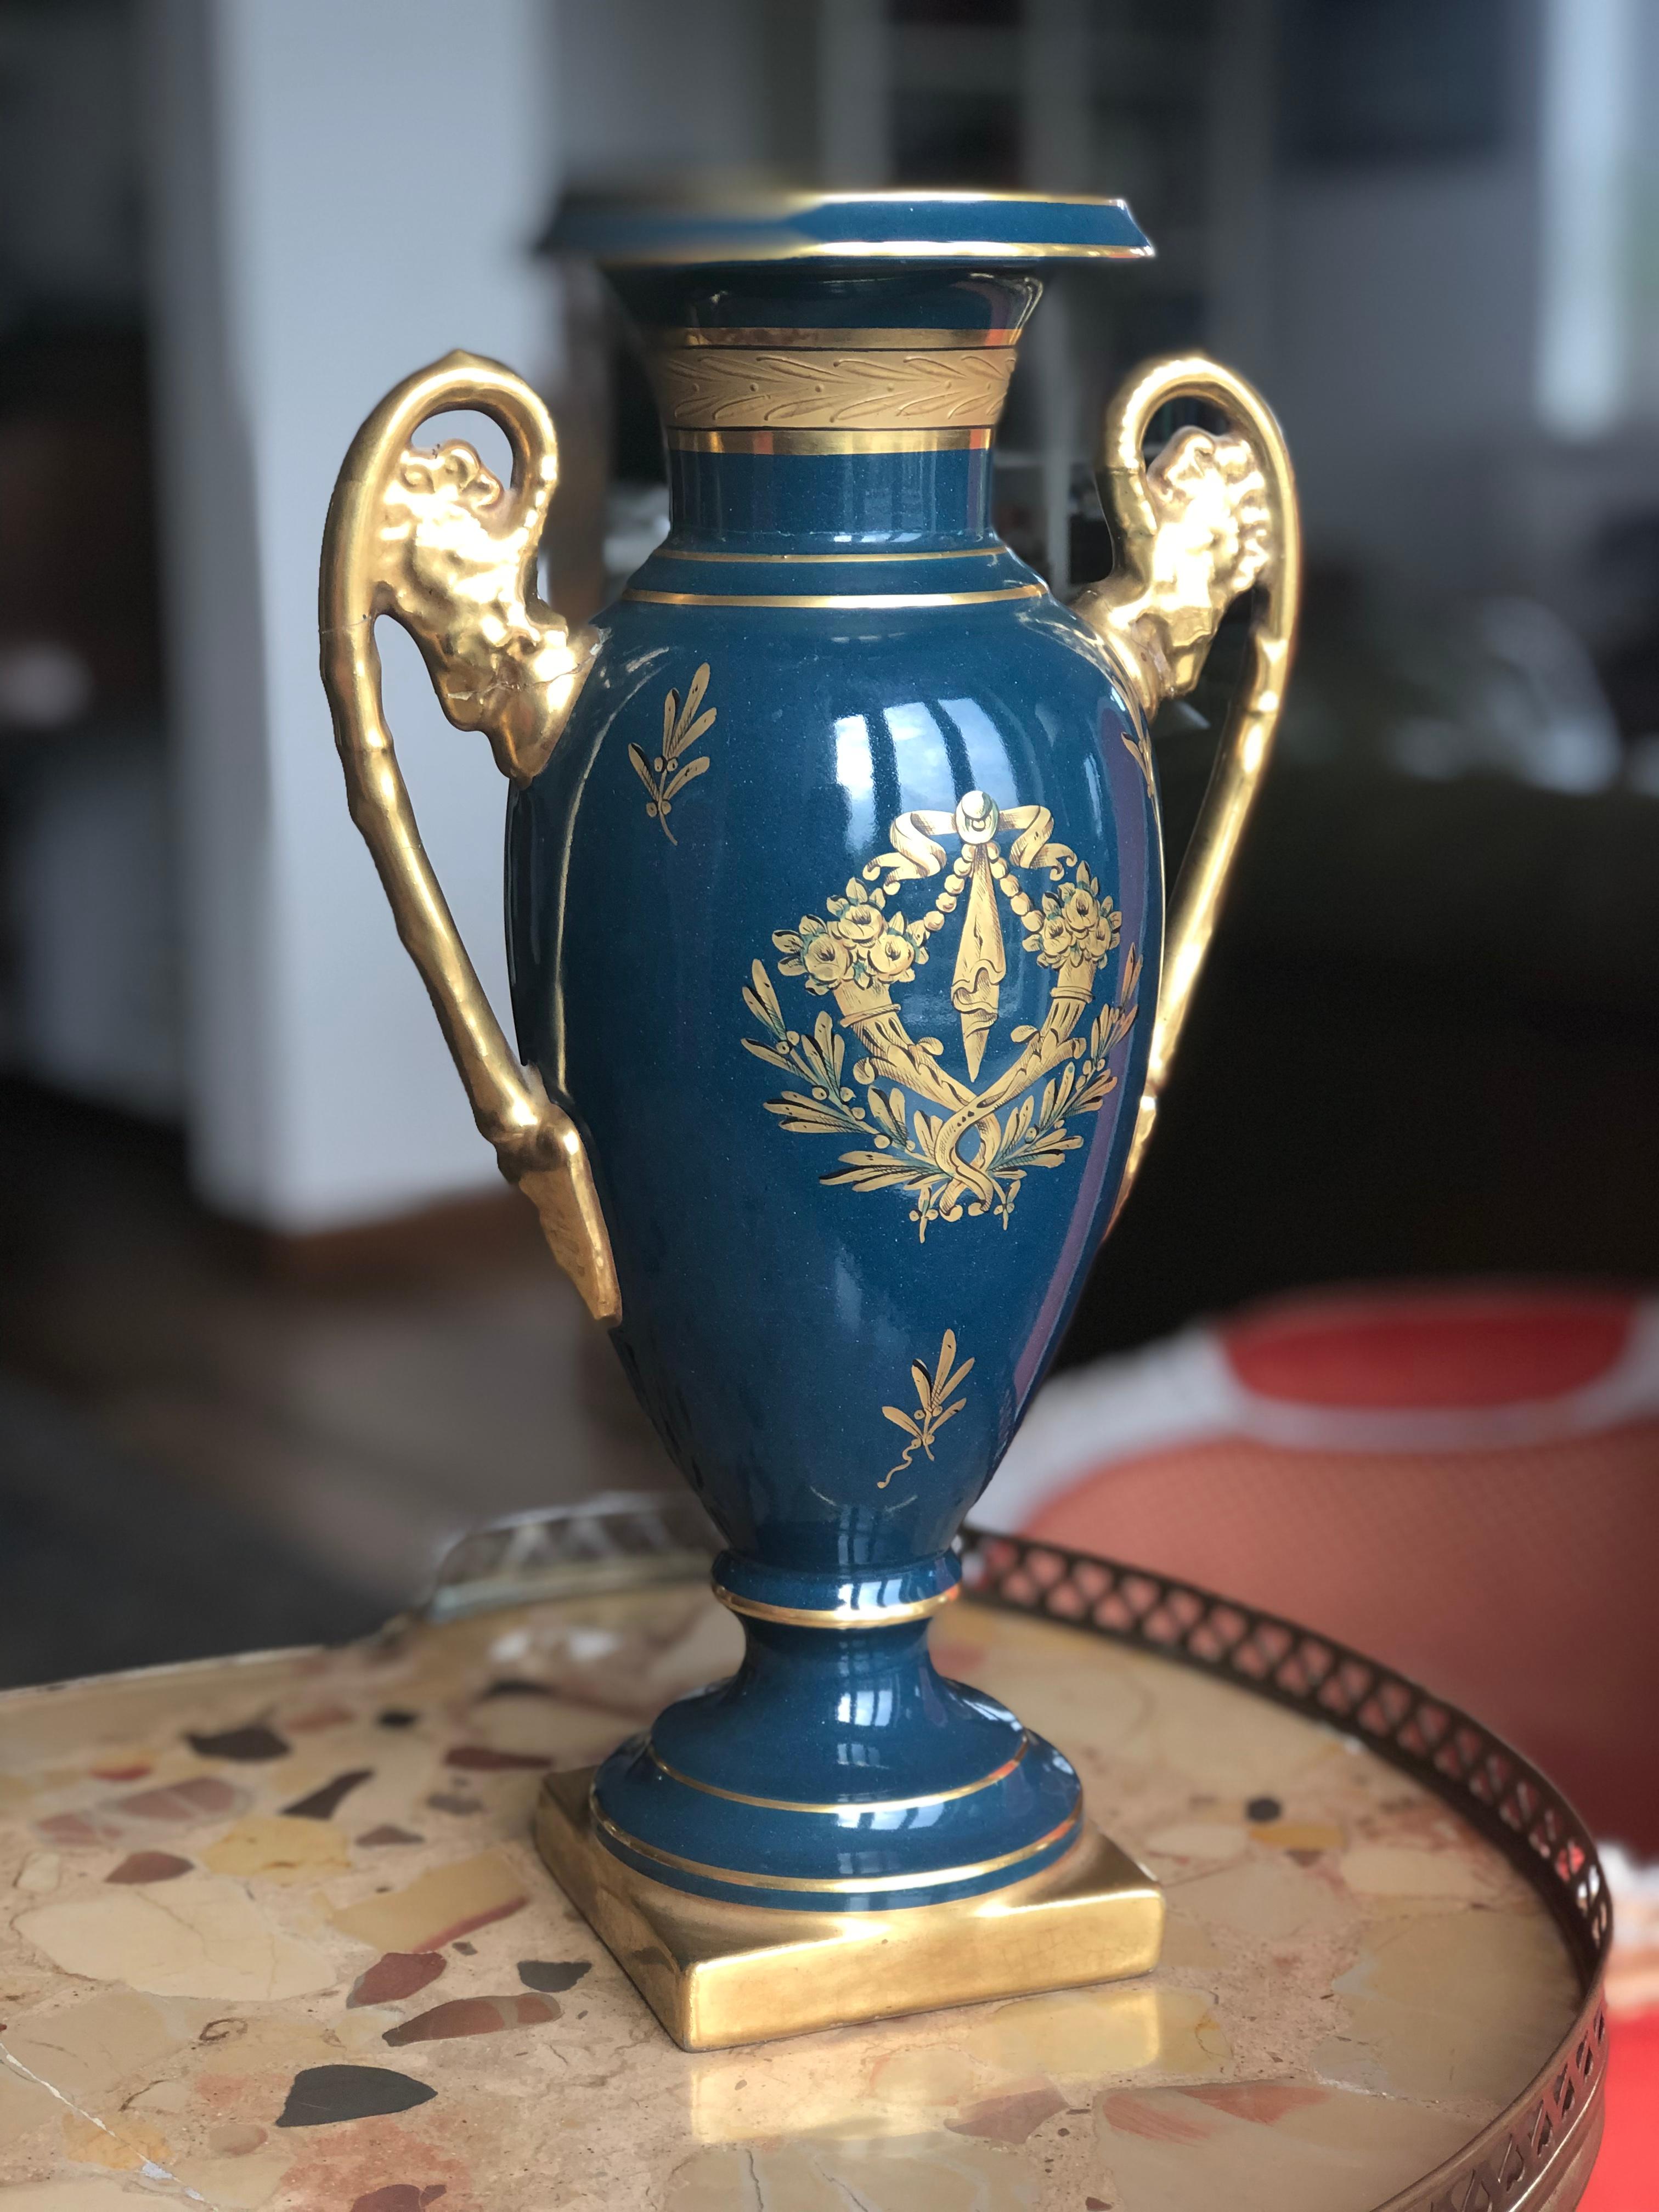 Amphora-shaped French vase in the Empire style, circa 1920. The vase is in marine-blue background with gold decorations in the spirit of Sèvres. Round neck surrounded by gold line, gilded stylish handles in the Empire style, just like the shape and